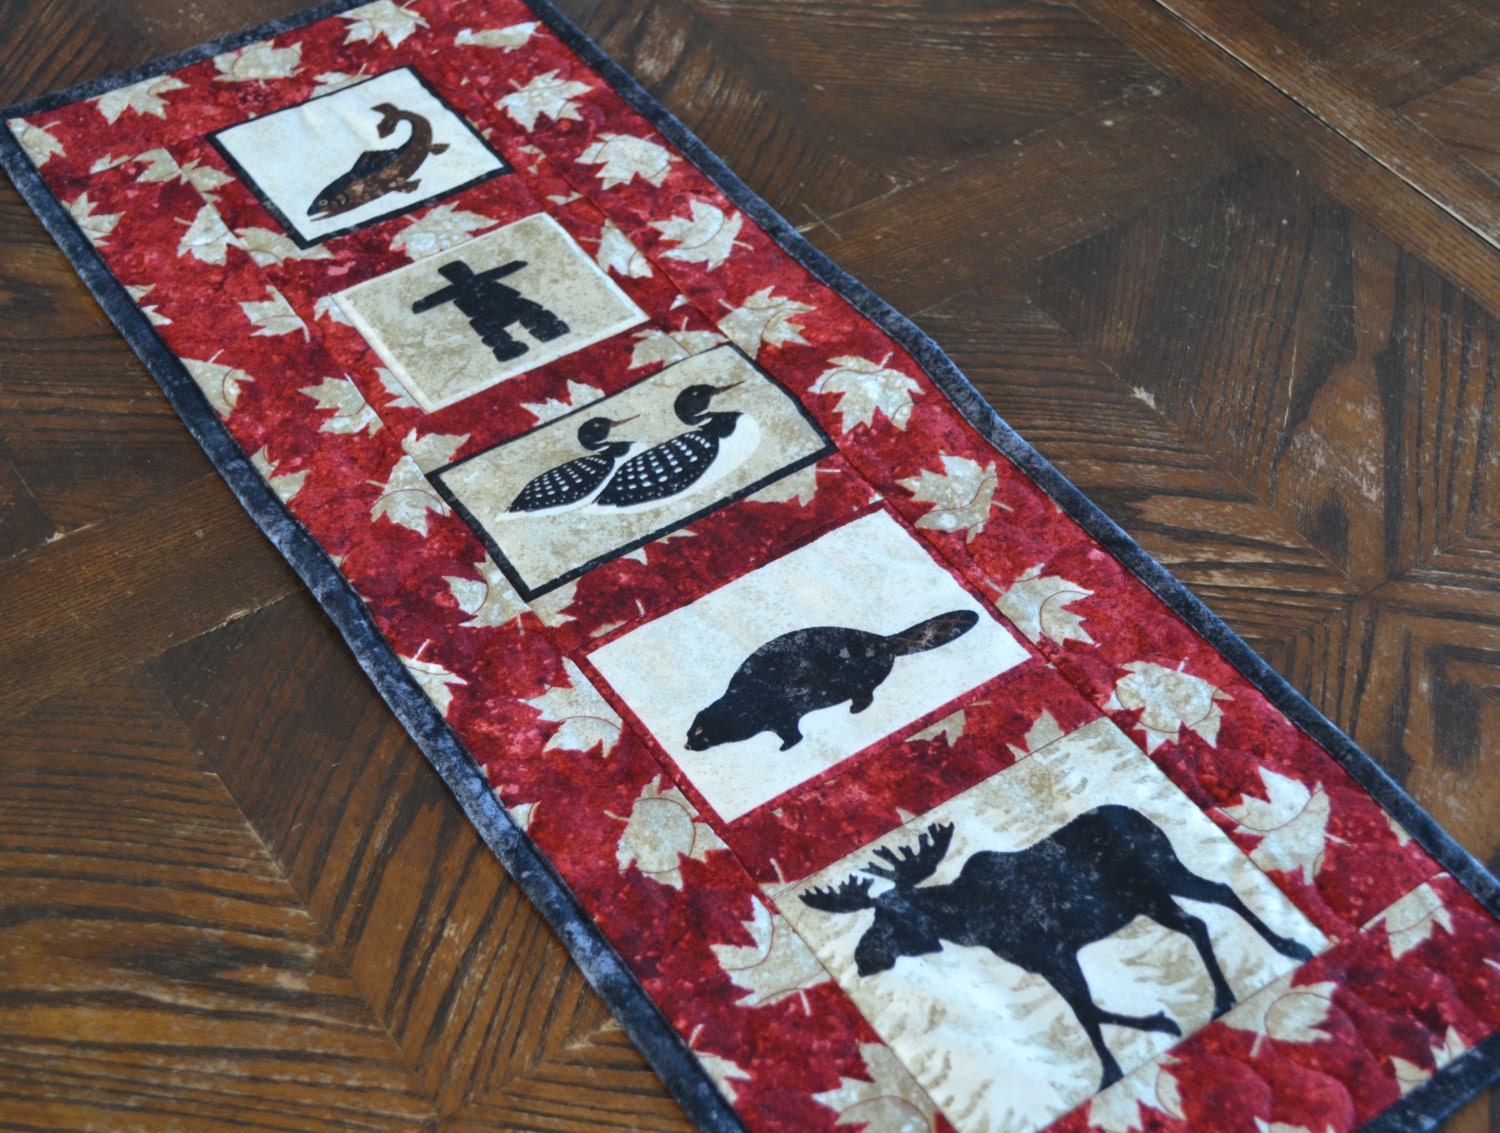 Canadian Art Quilt Wall Hanging Moose Beaver Loon Salmon